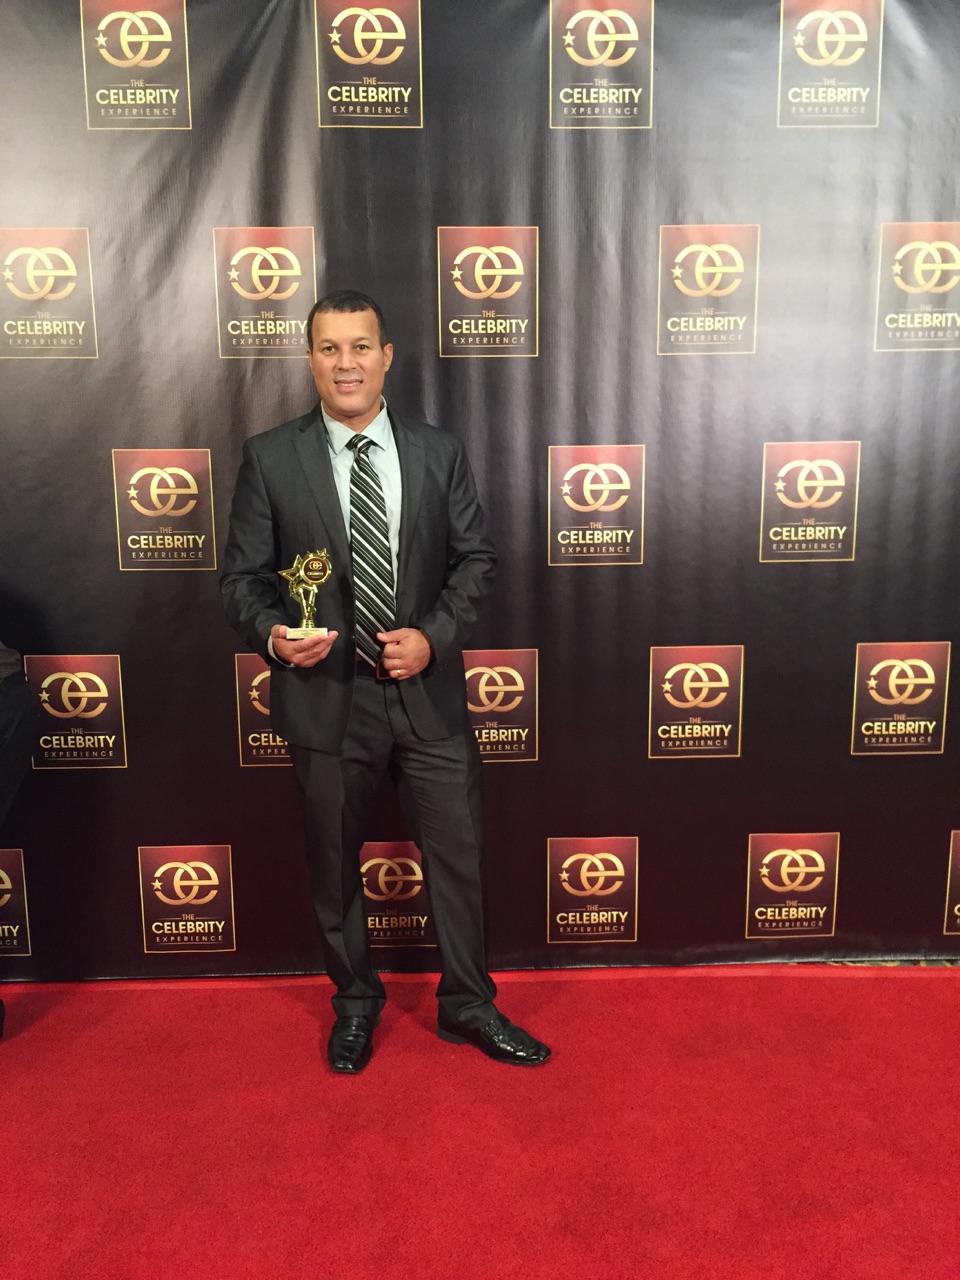 I walk the rep carpet after awarded the best commercial actor category